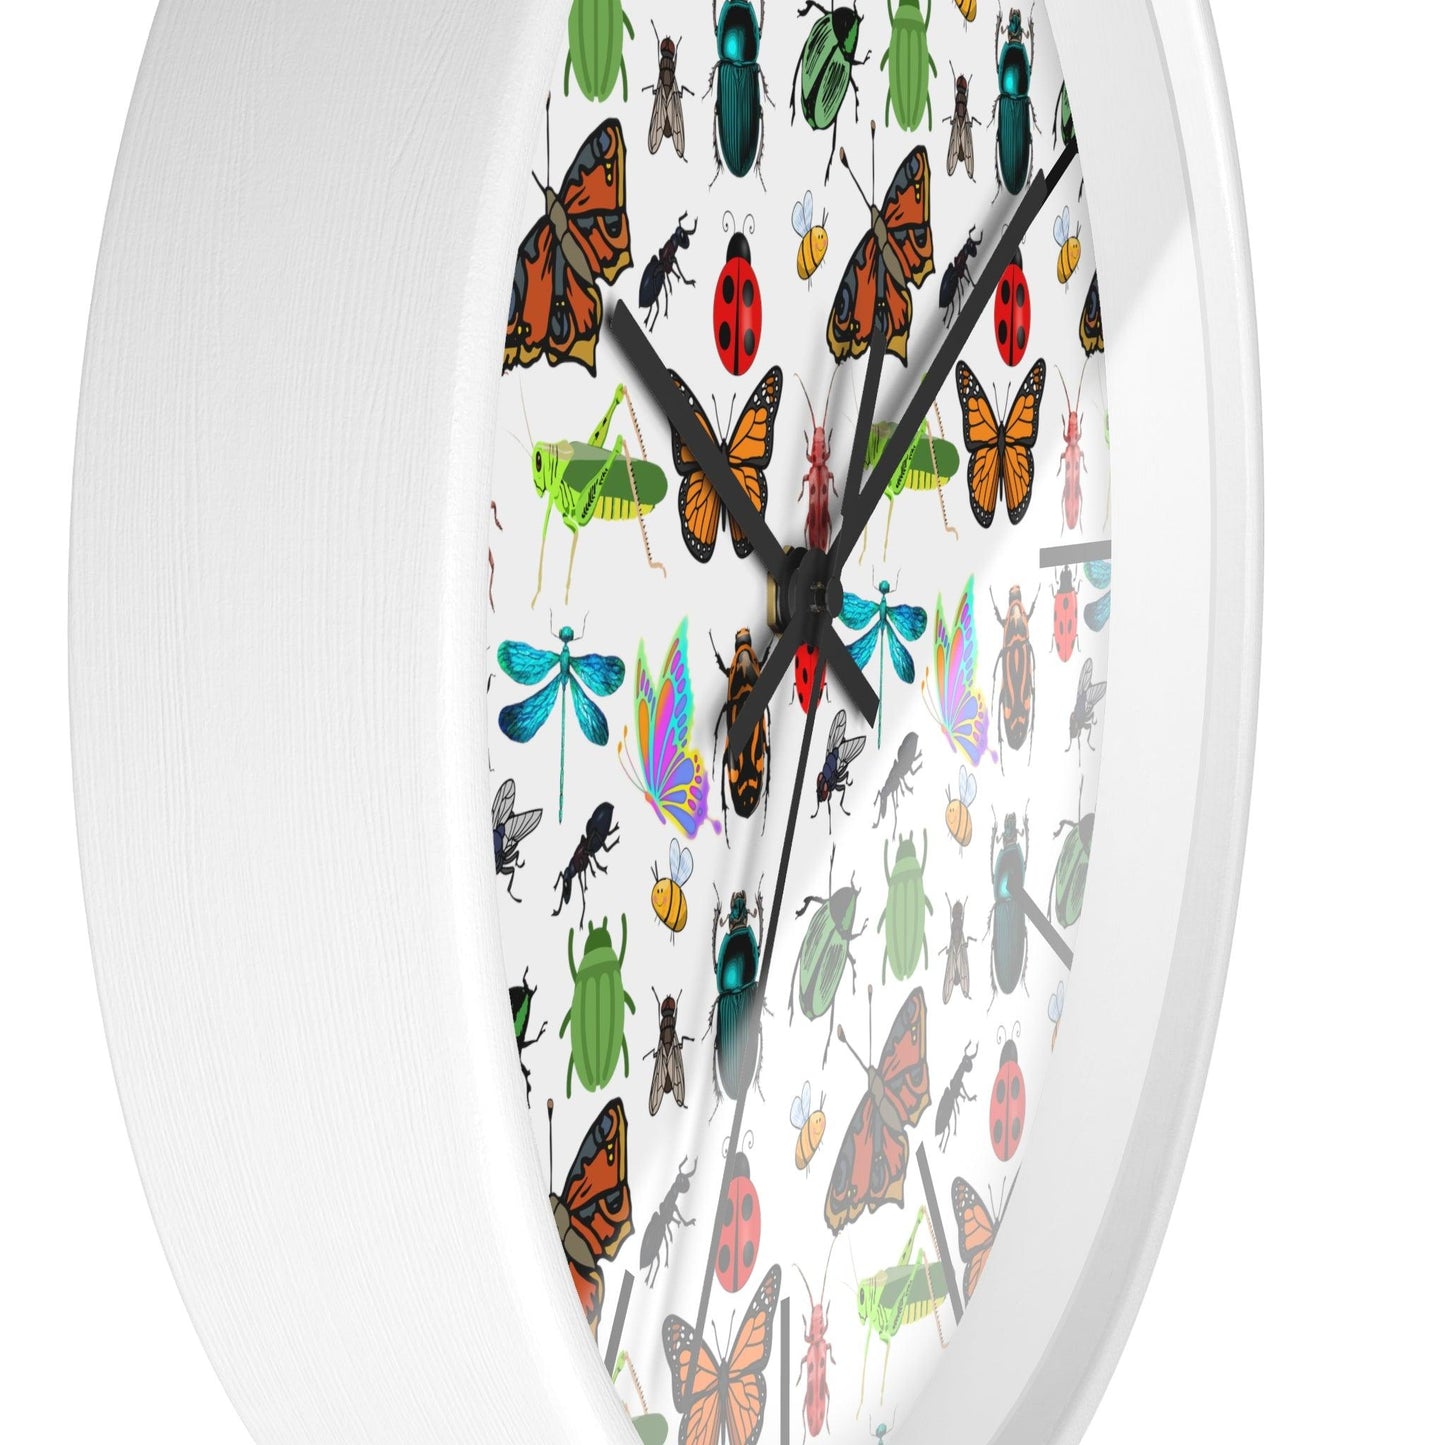 Bug Wall Clock Wall Clock Insects Wall Clock Home Decor Gift House Warming Gift - Unique Gift Farmhouse Clocks For Wall Living Room Bedroom